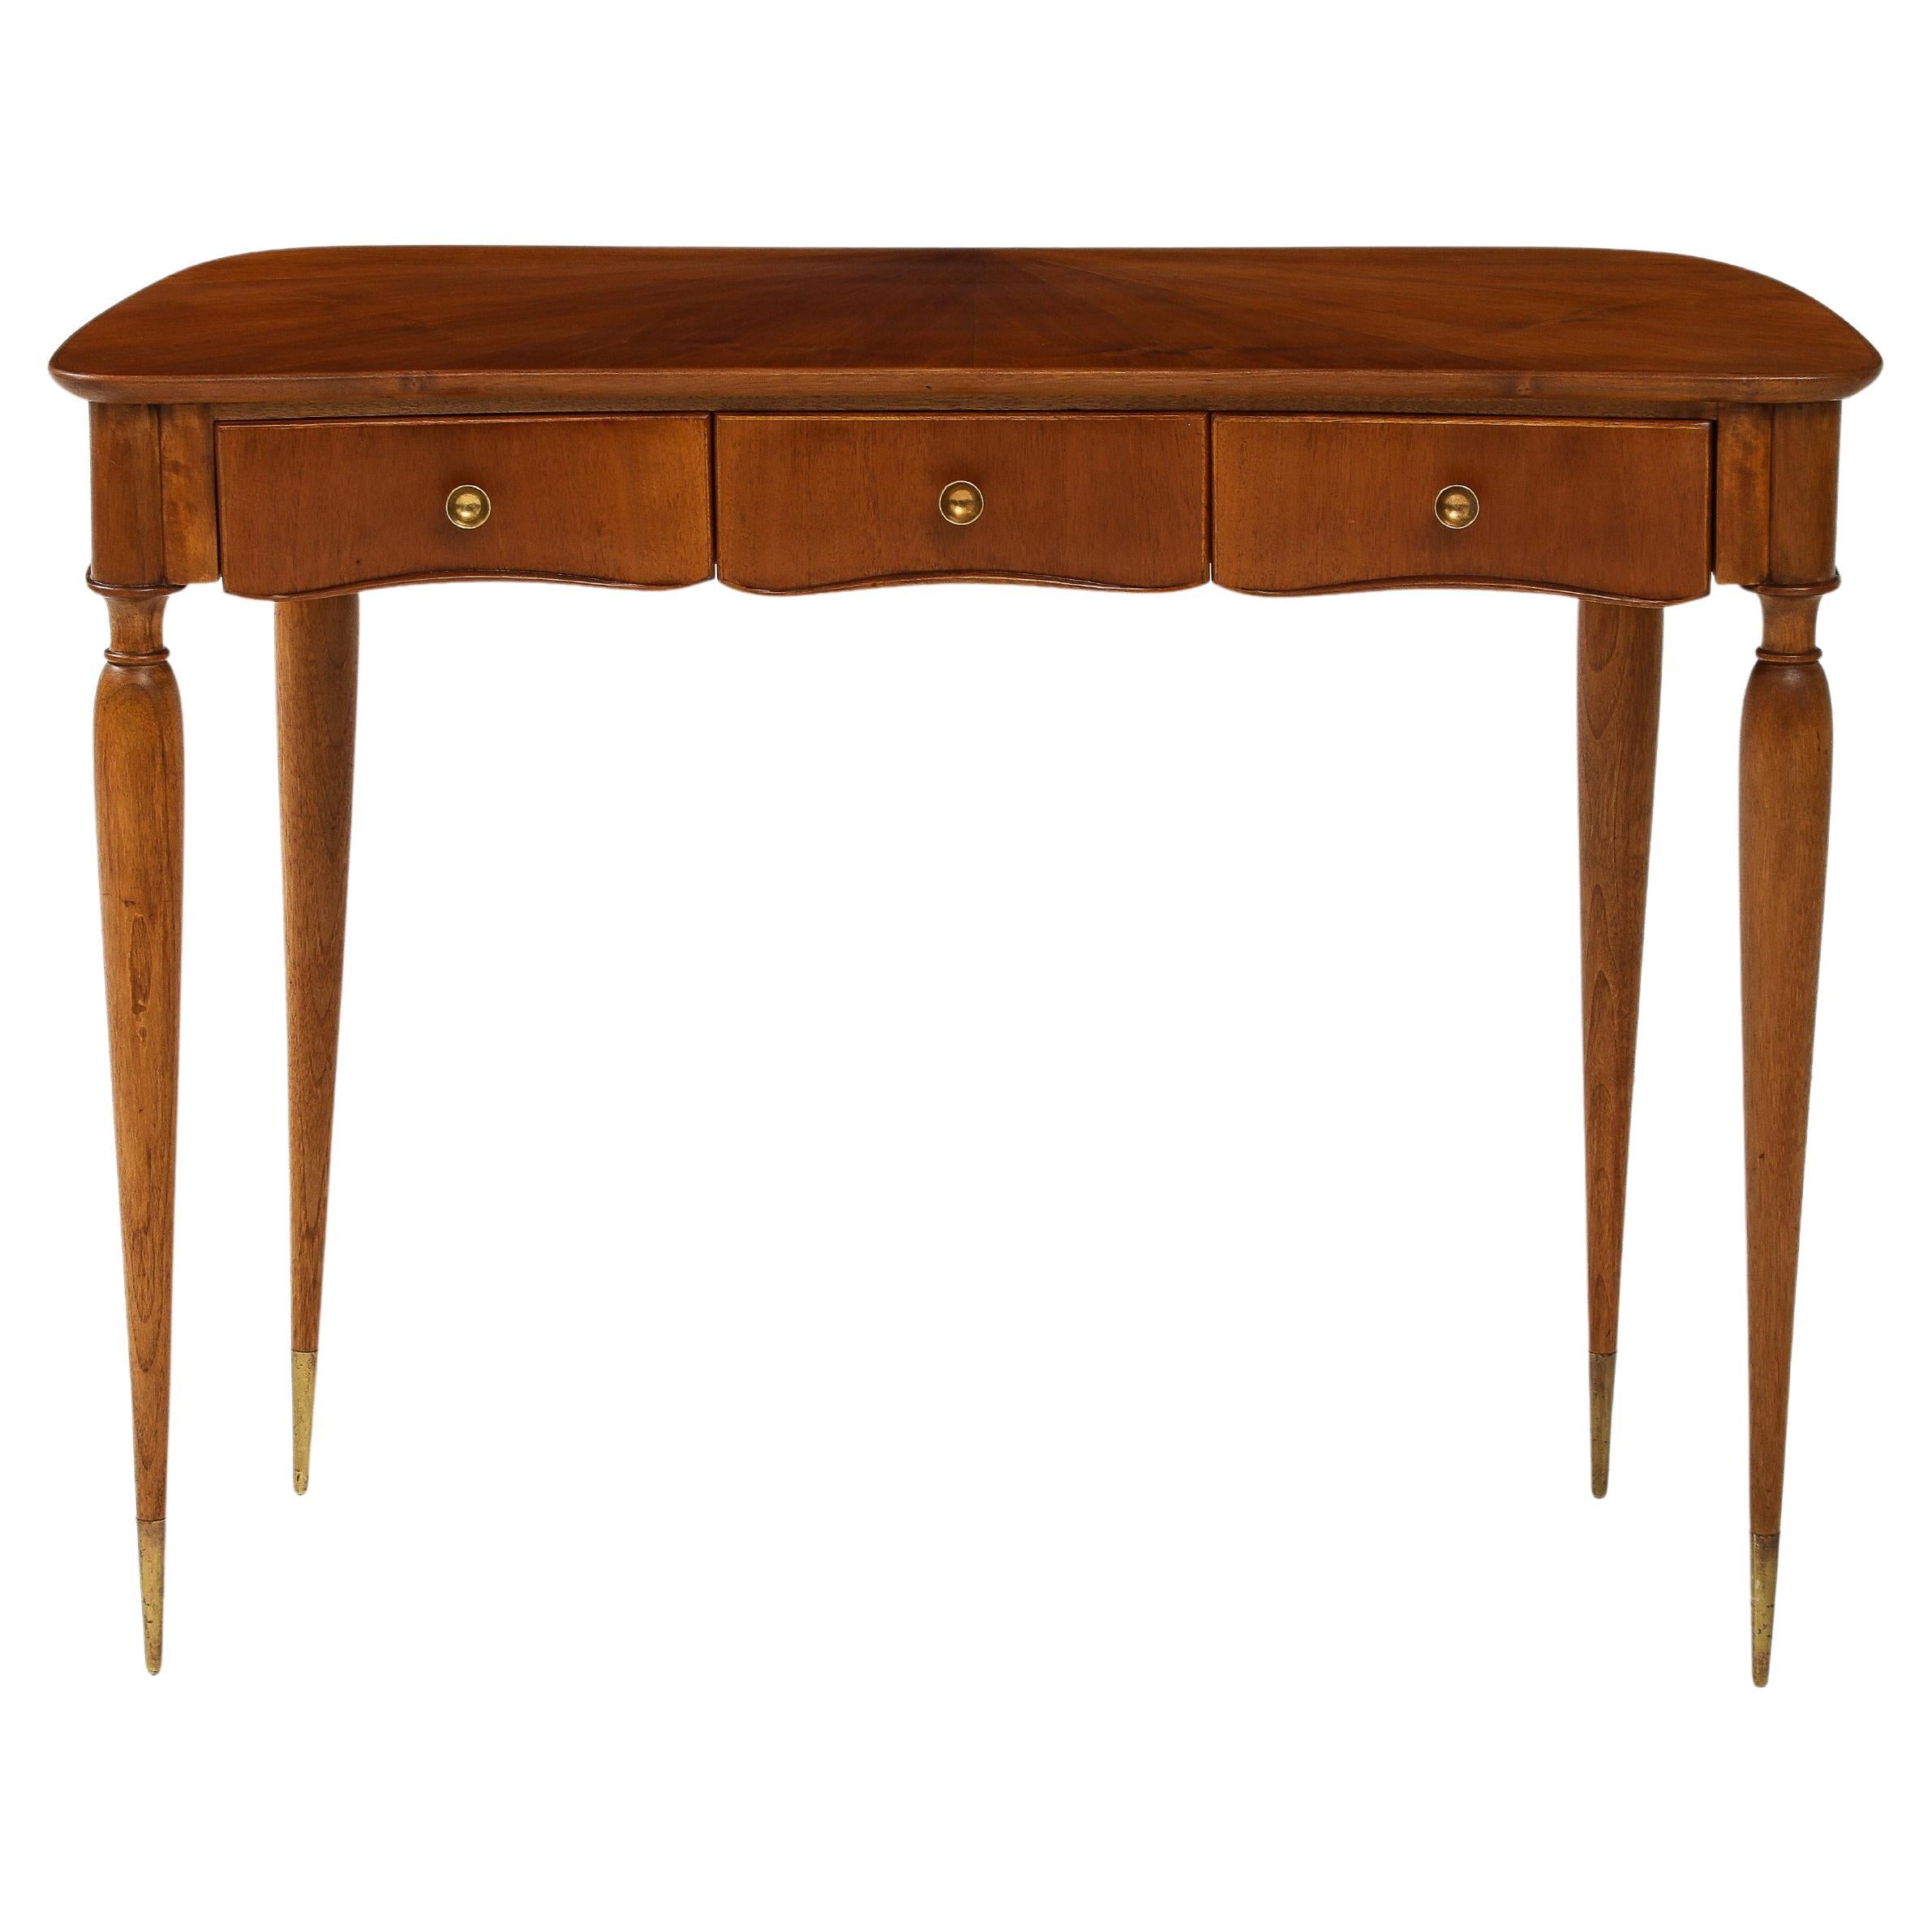 1950s Italian Walnut Wood Console or Vanity Dressing Table For Sale